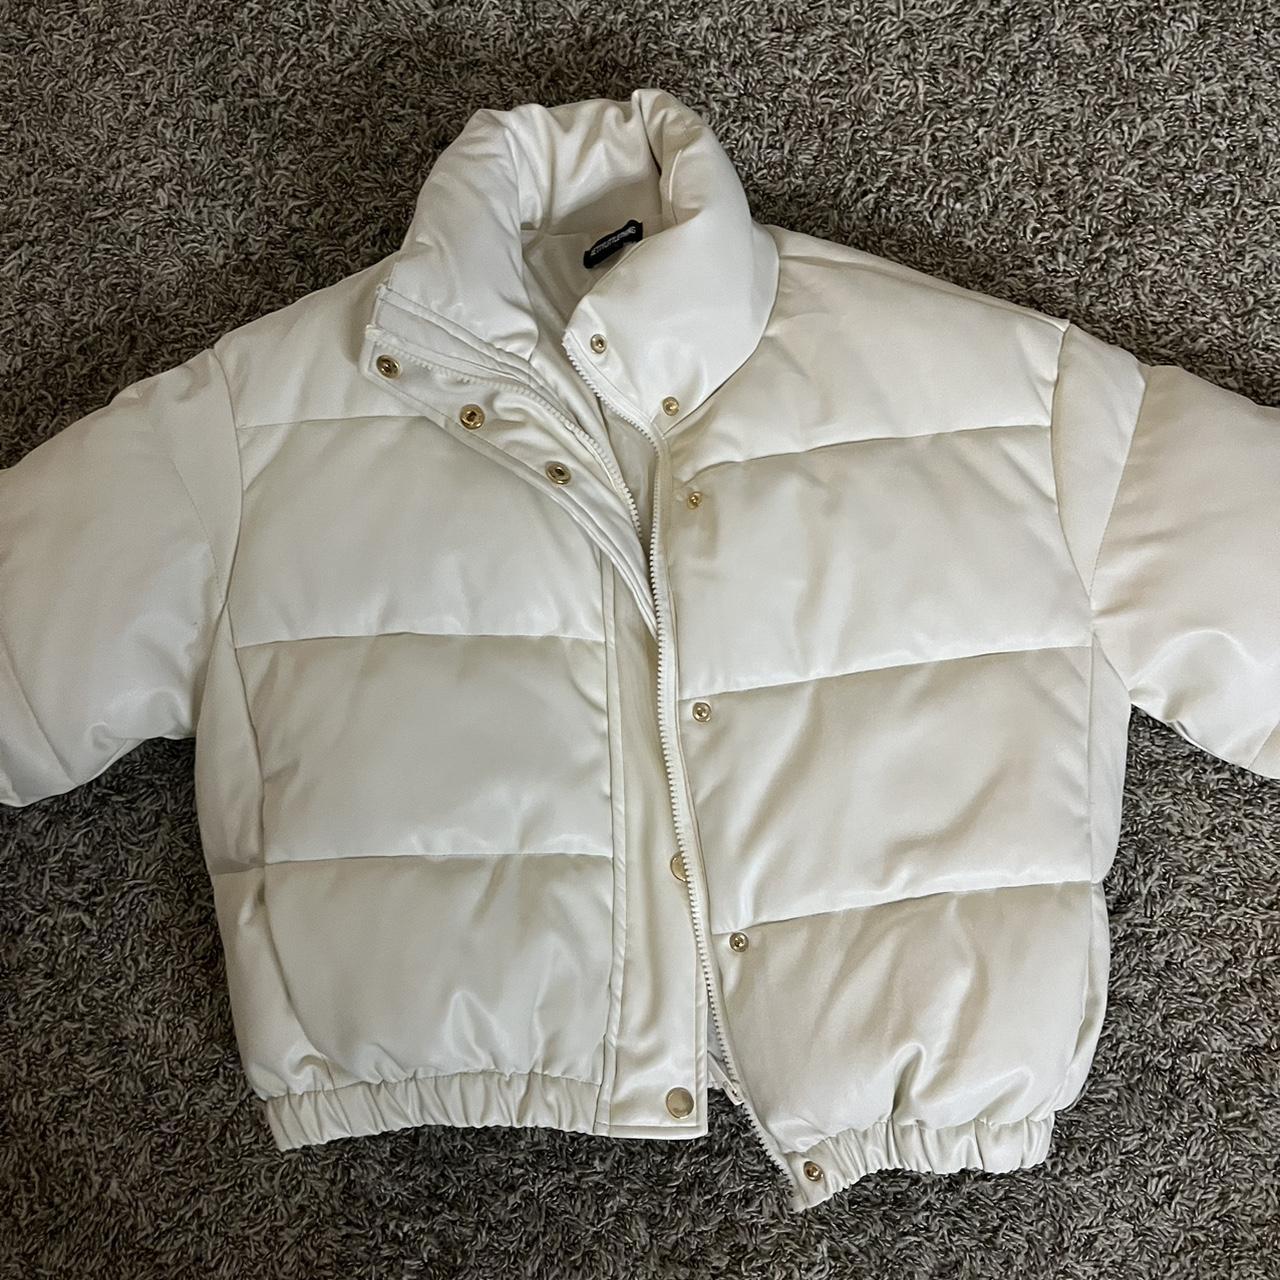 cream leather puffer jacket size small - Depop